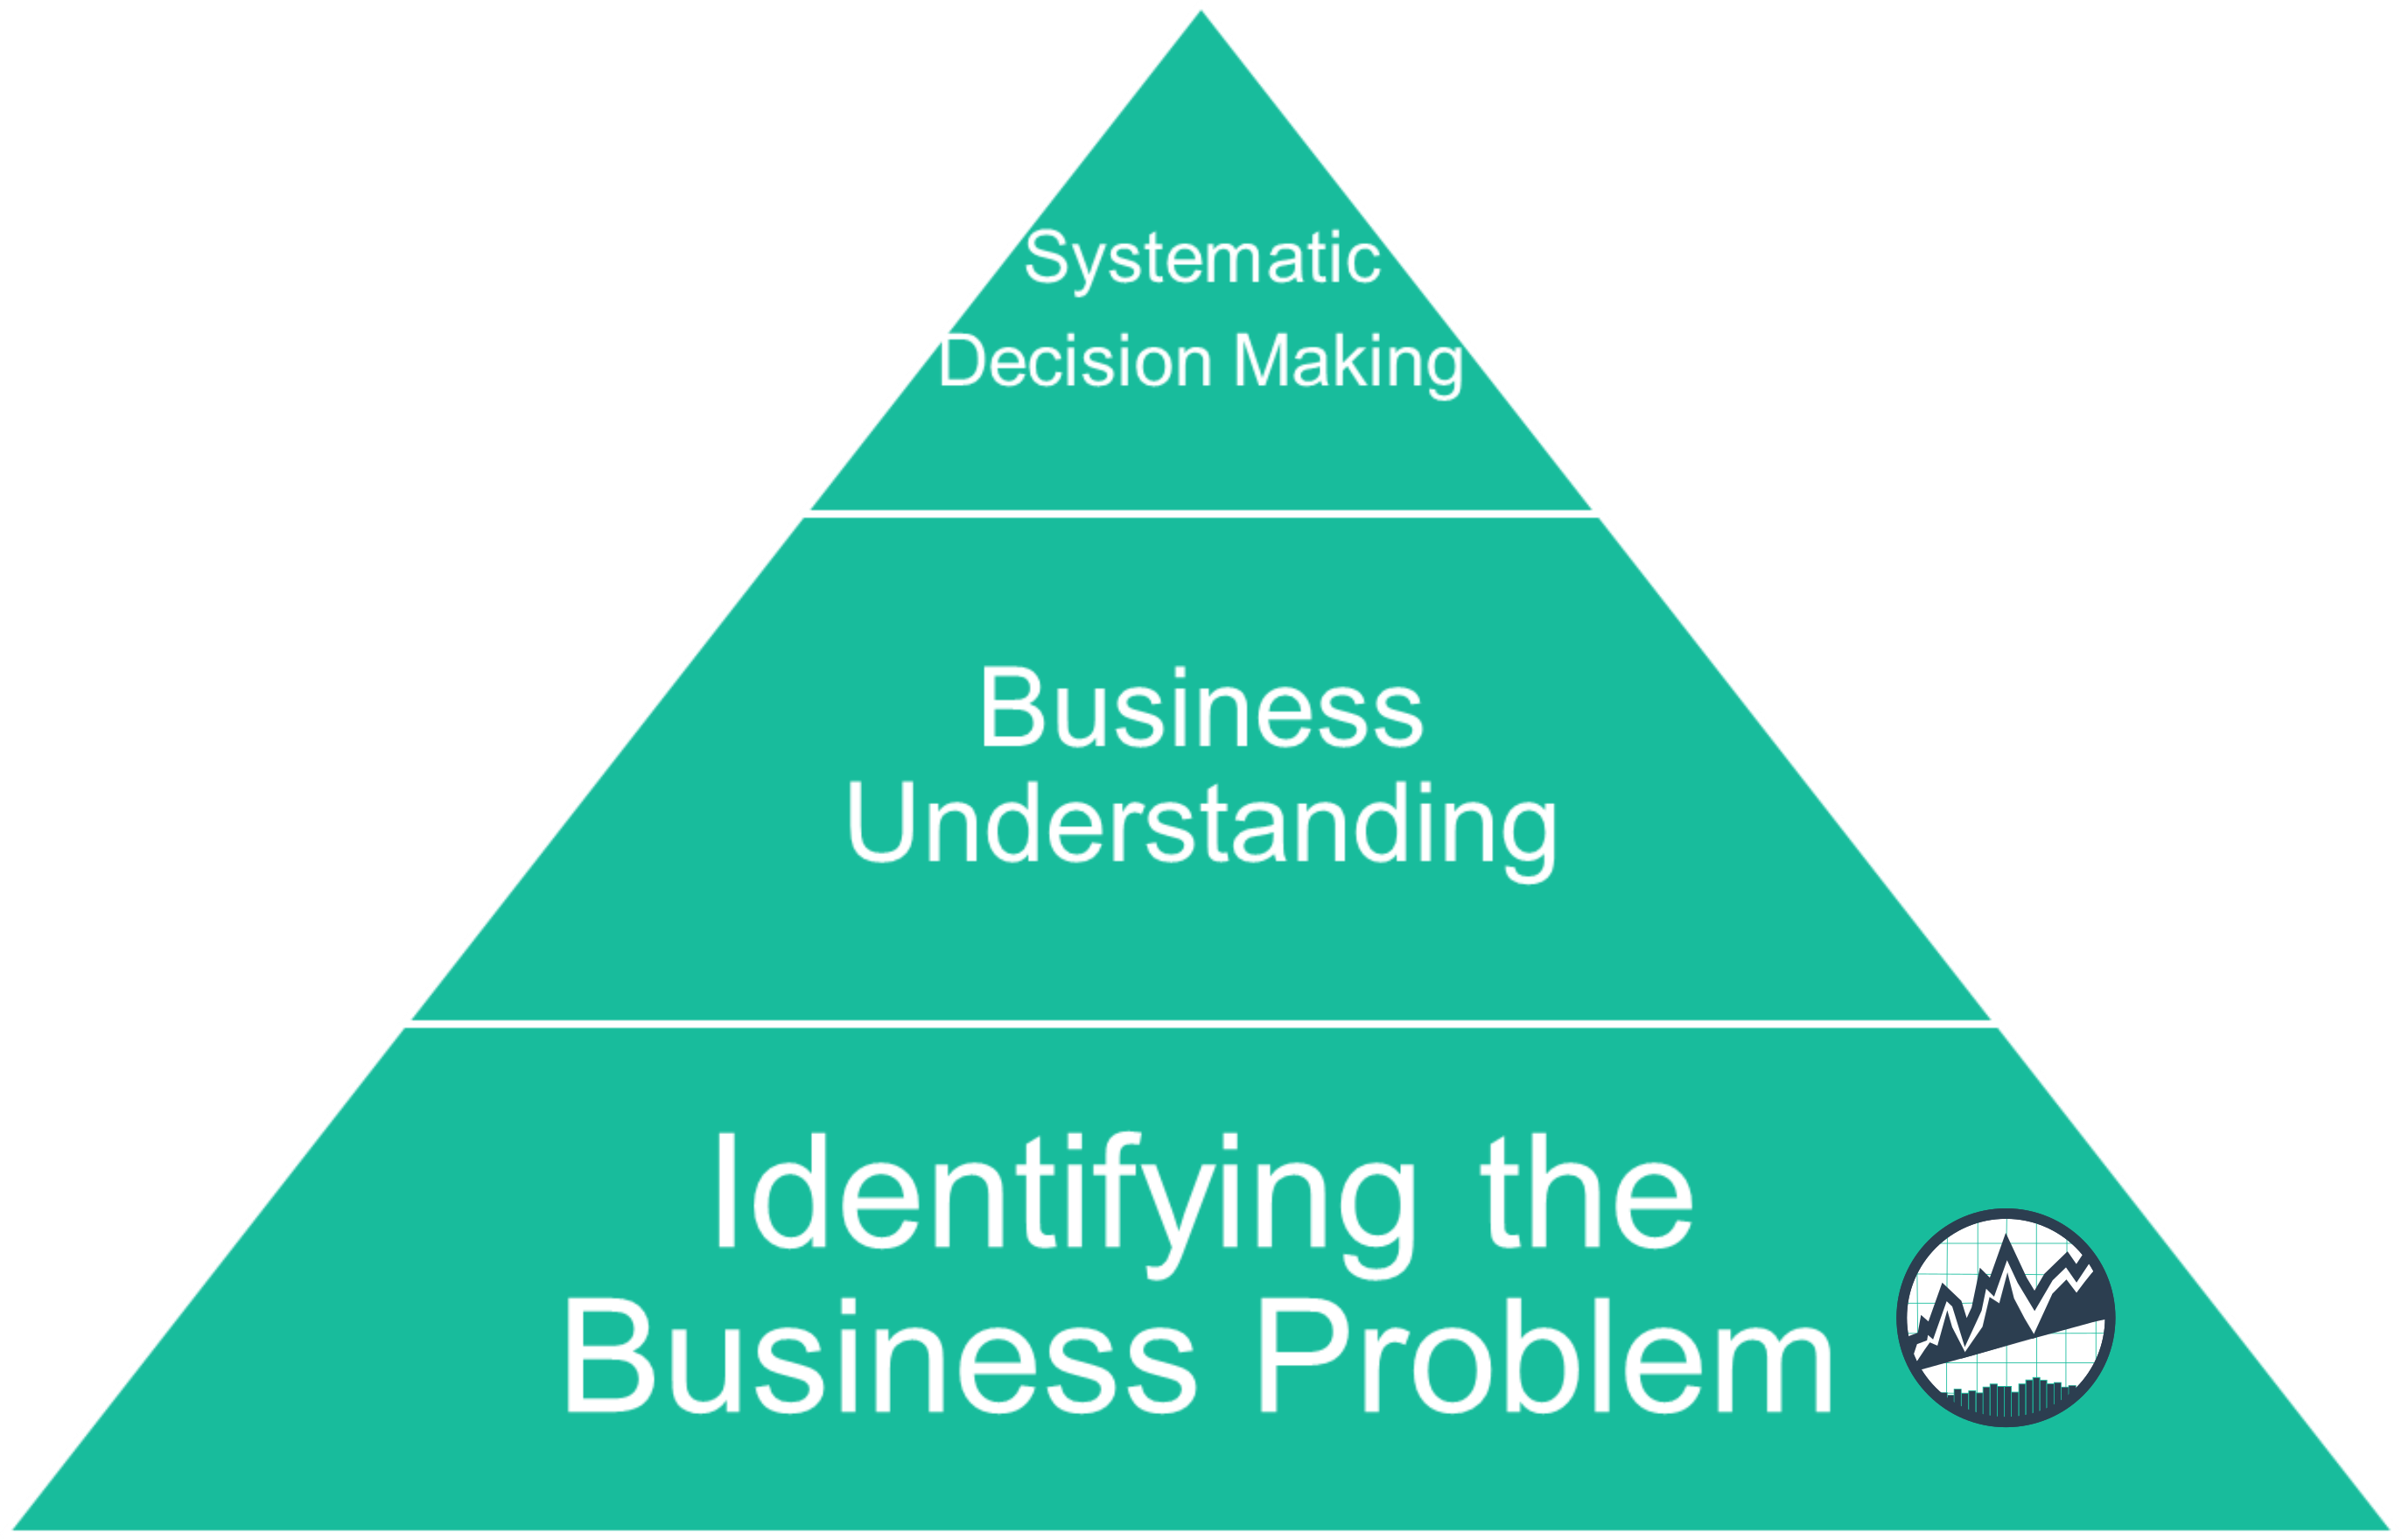 Systematic Decision Making Pyramid